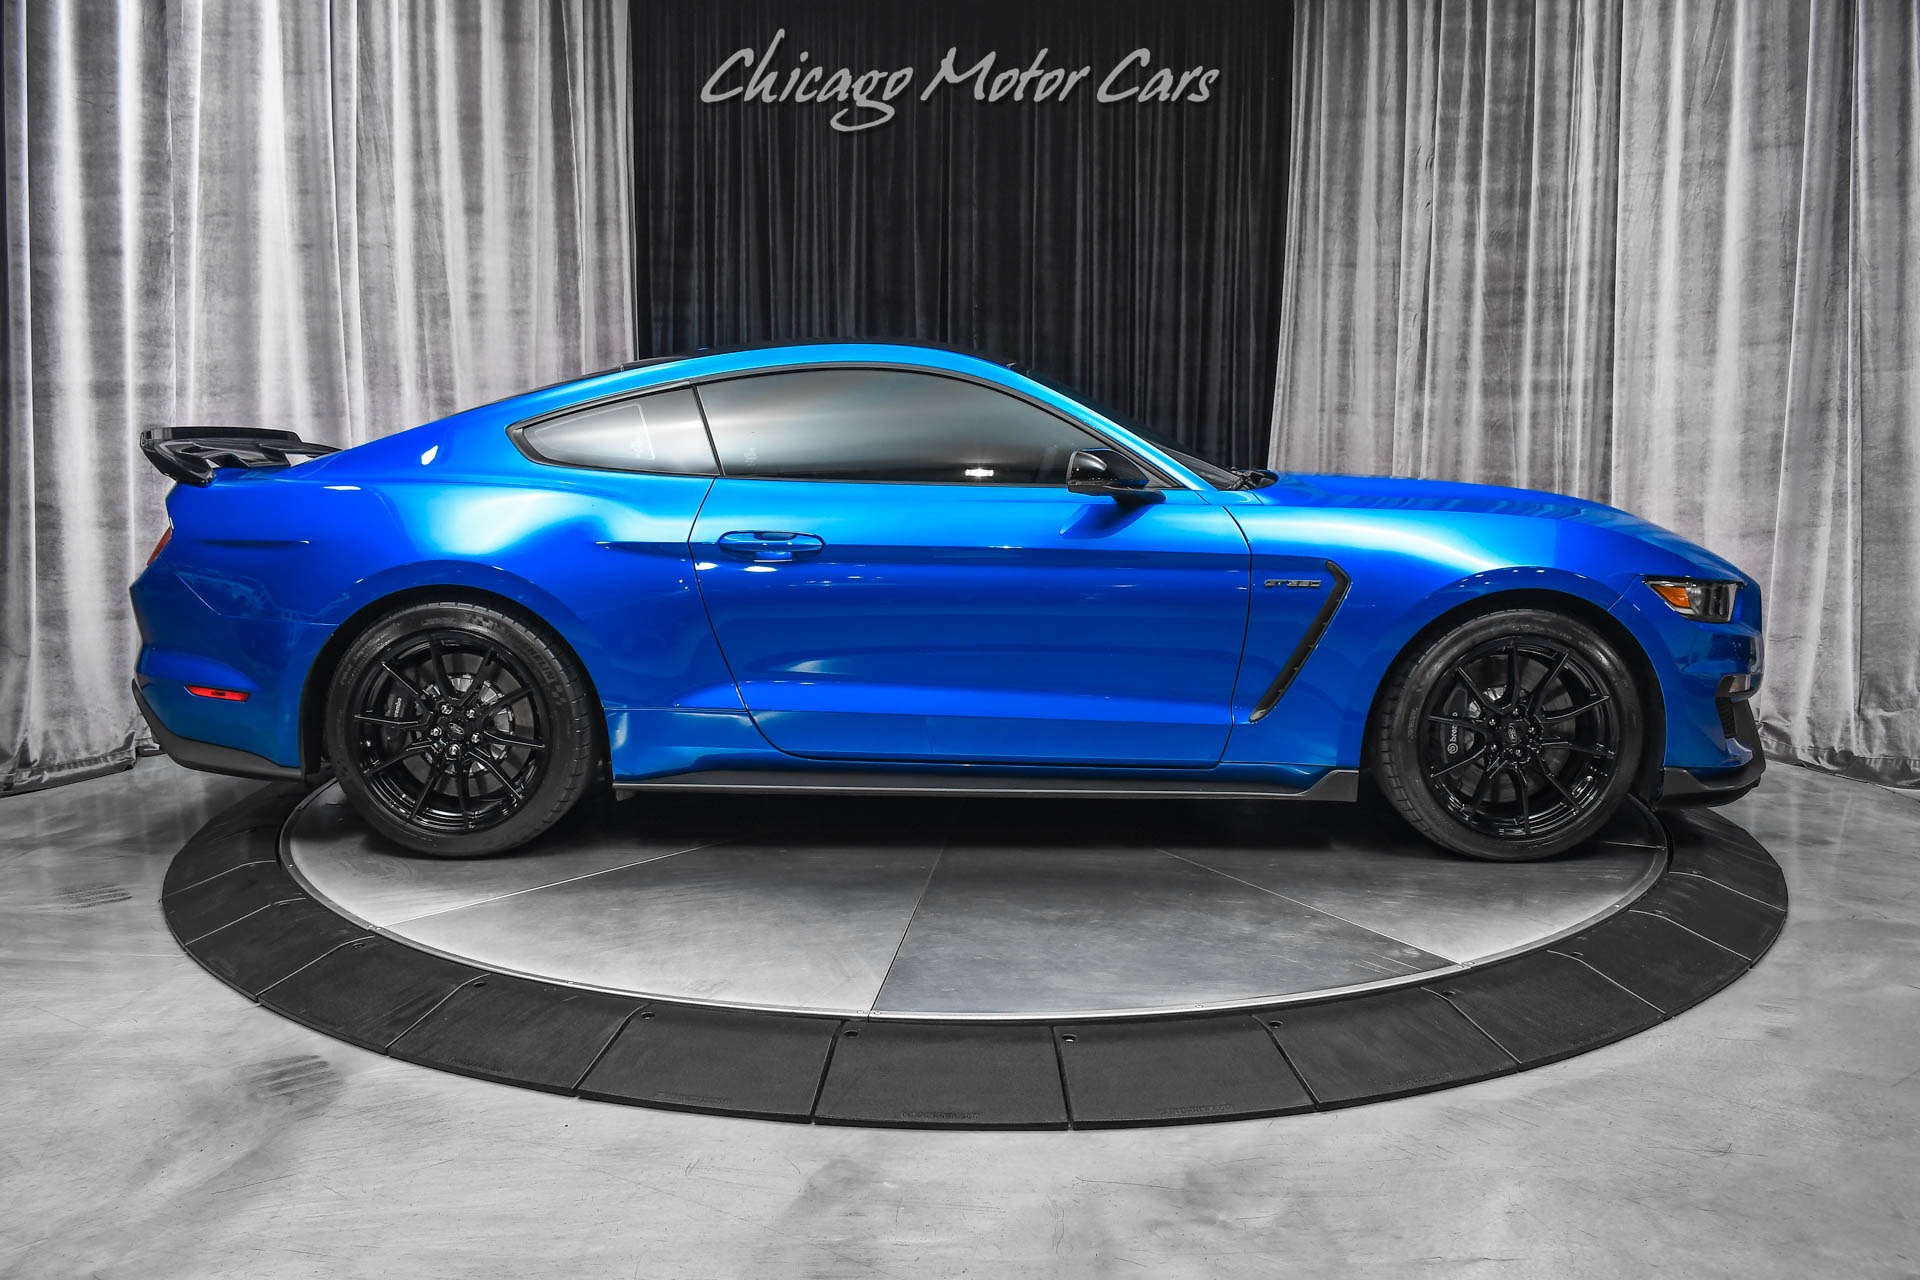 Used-2019-Ford-Mustang-Shelby-GT350-6-Speed-Manual-Flat-plane-526HP-Collectible-New-Tires